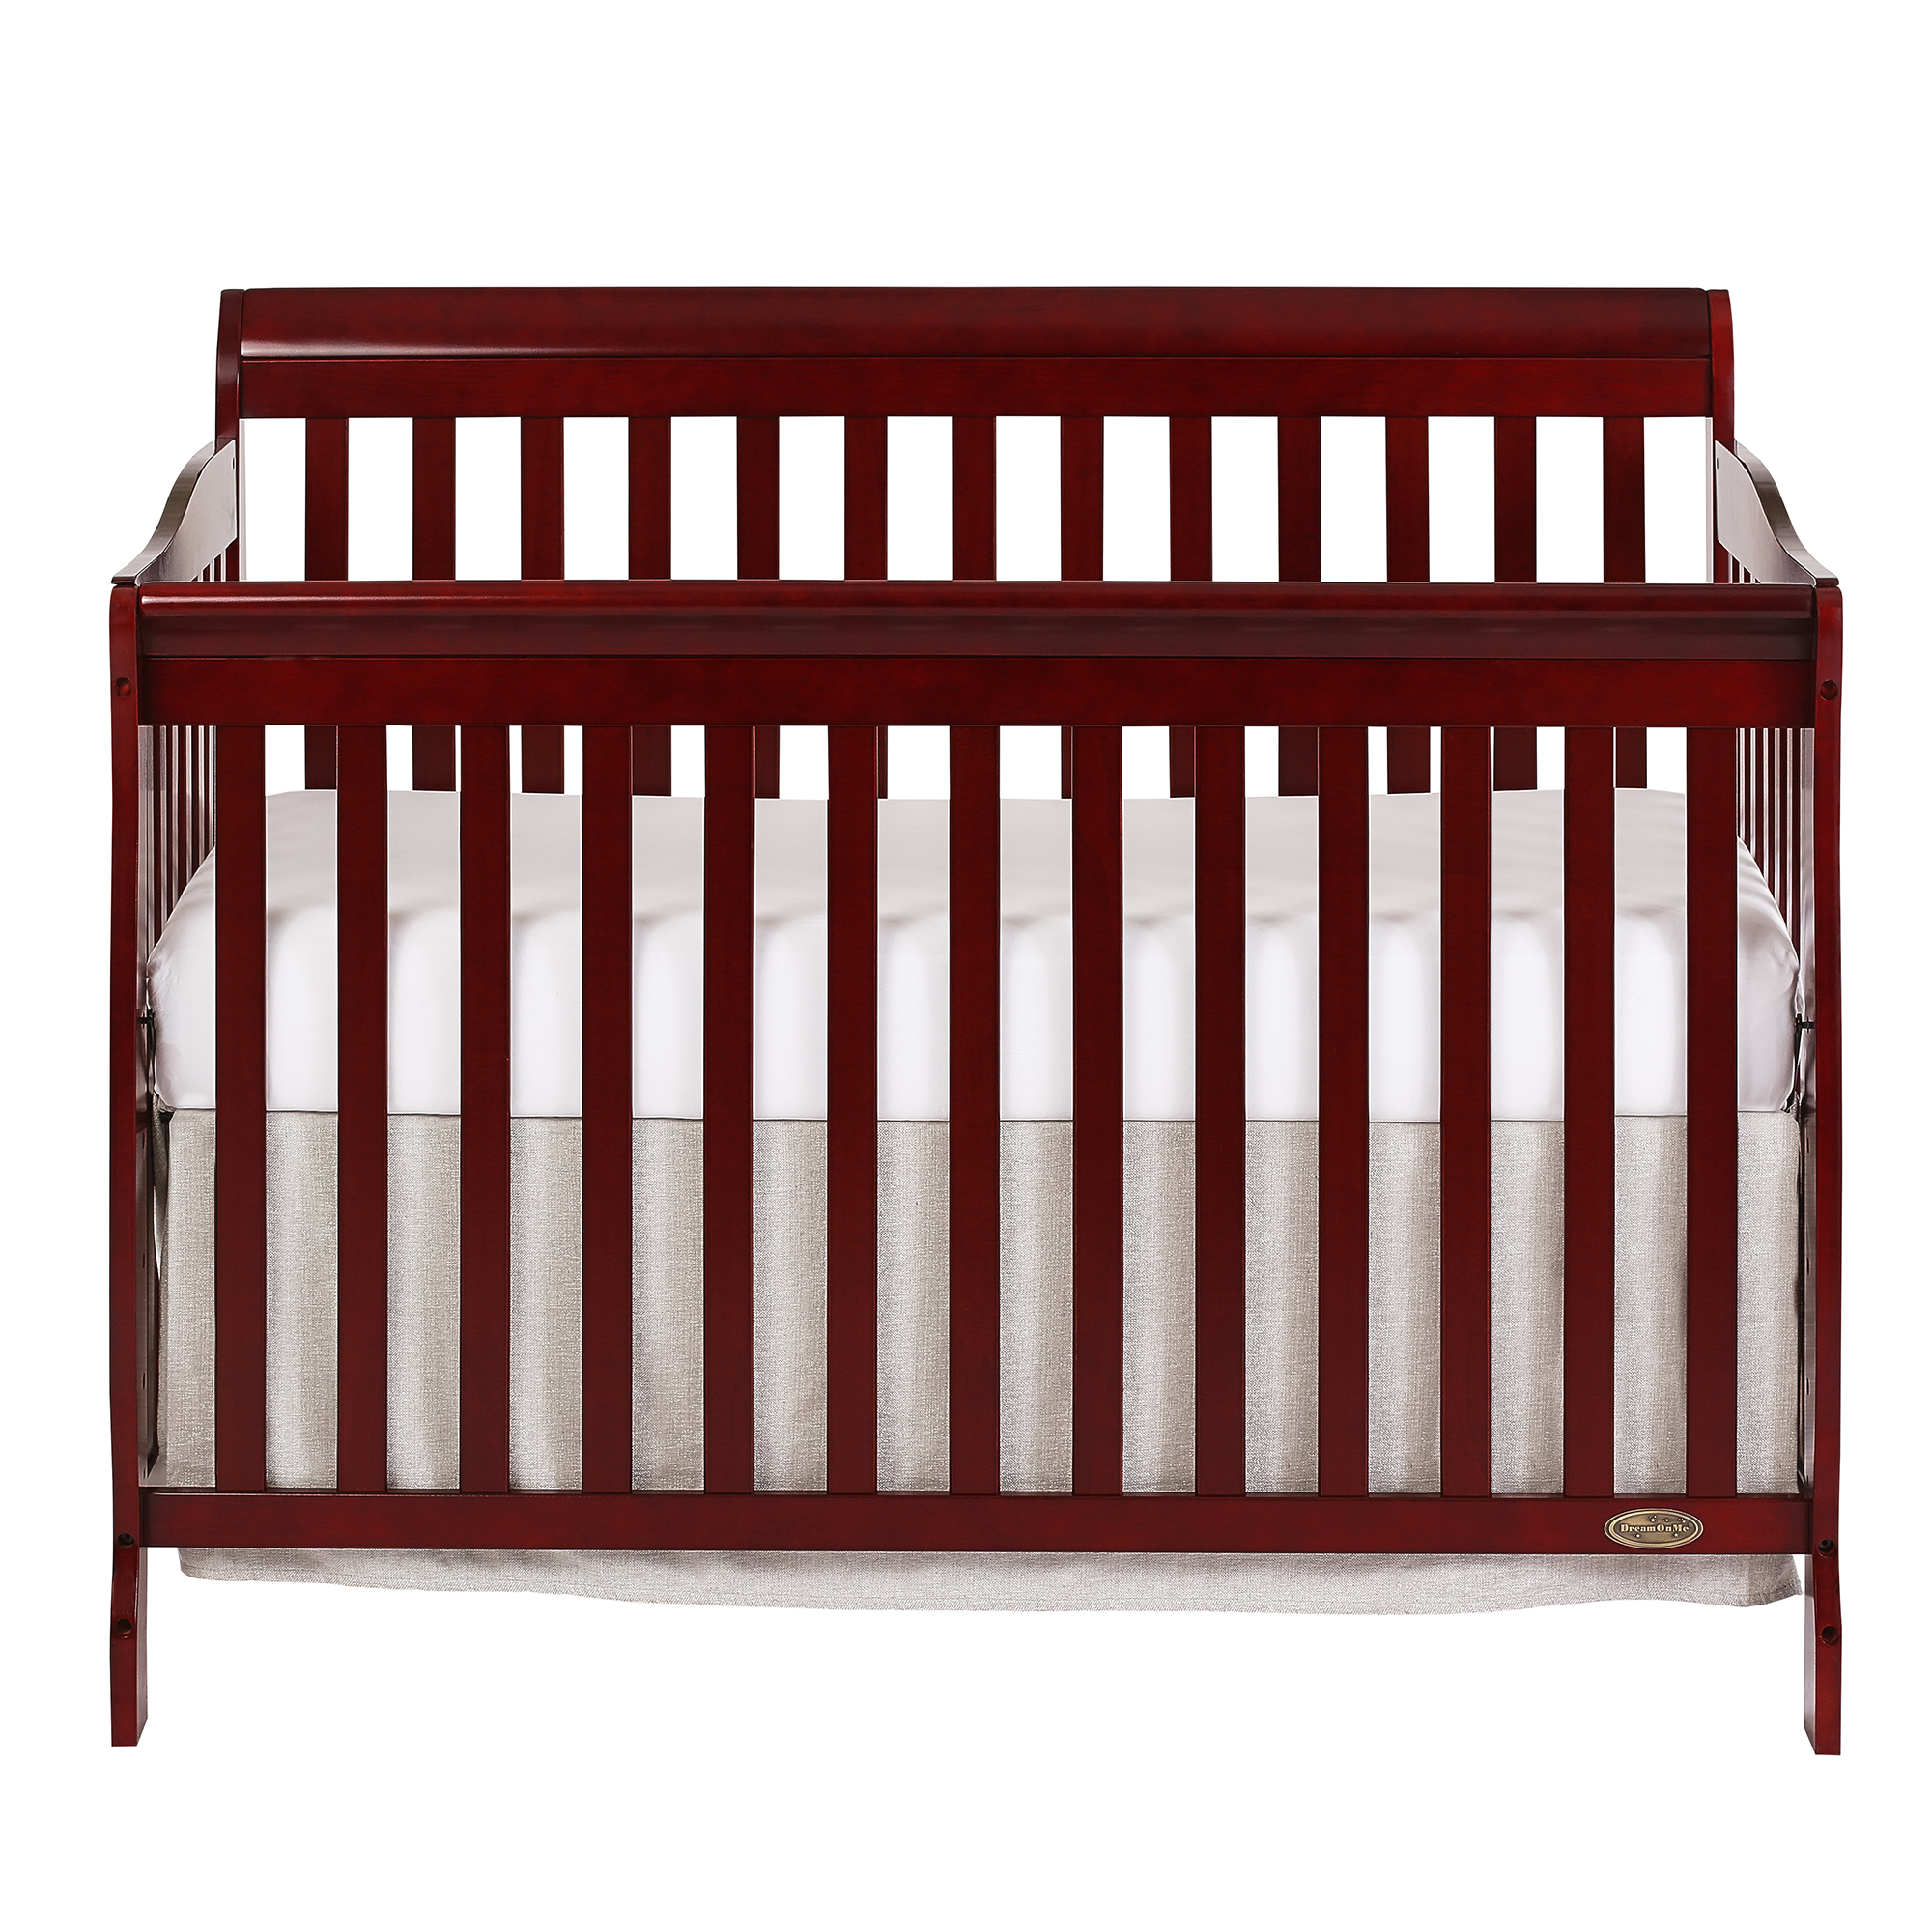 Dream On Me Ashton 5-in-1 Convertible Crib, Cherry, Greenguard Gold and JPMA Certified - image 1 of 15